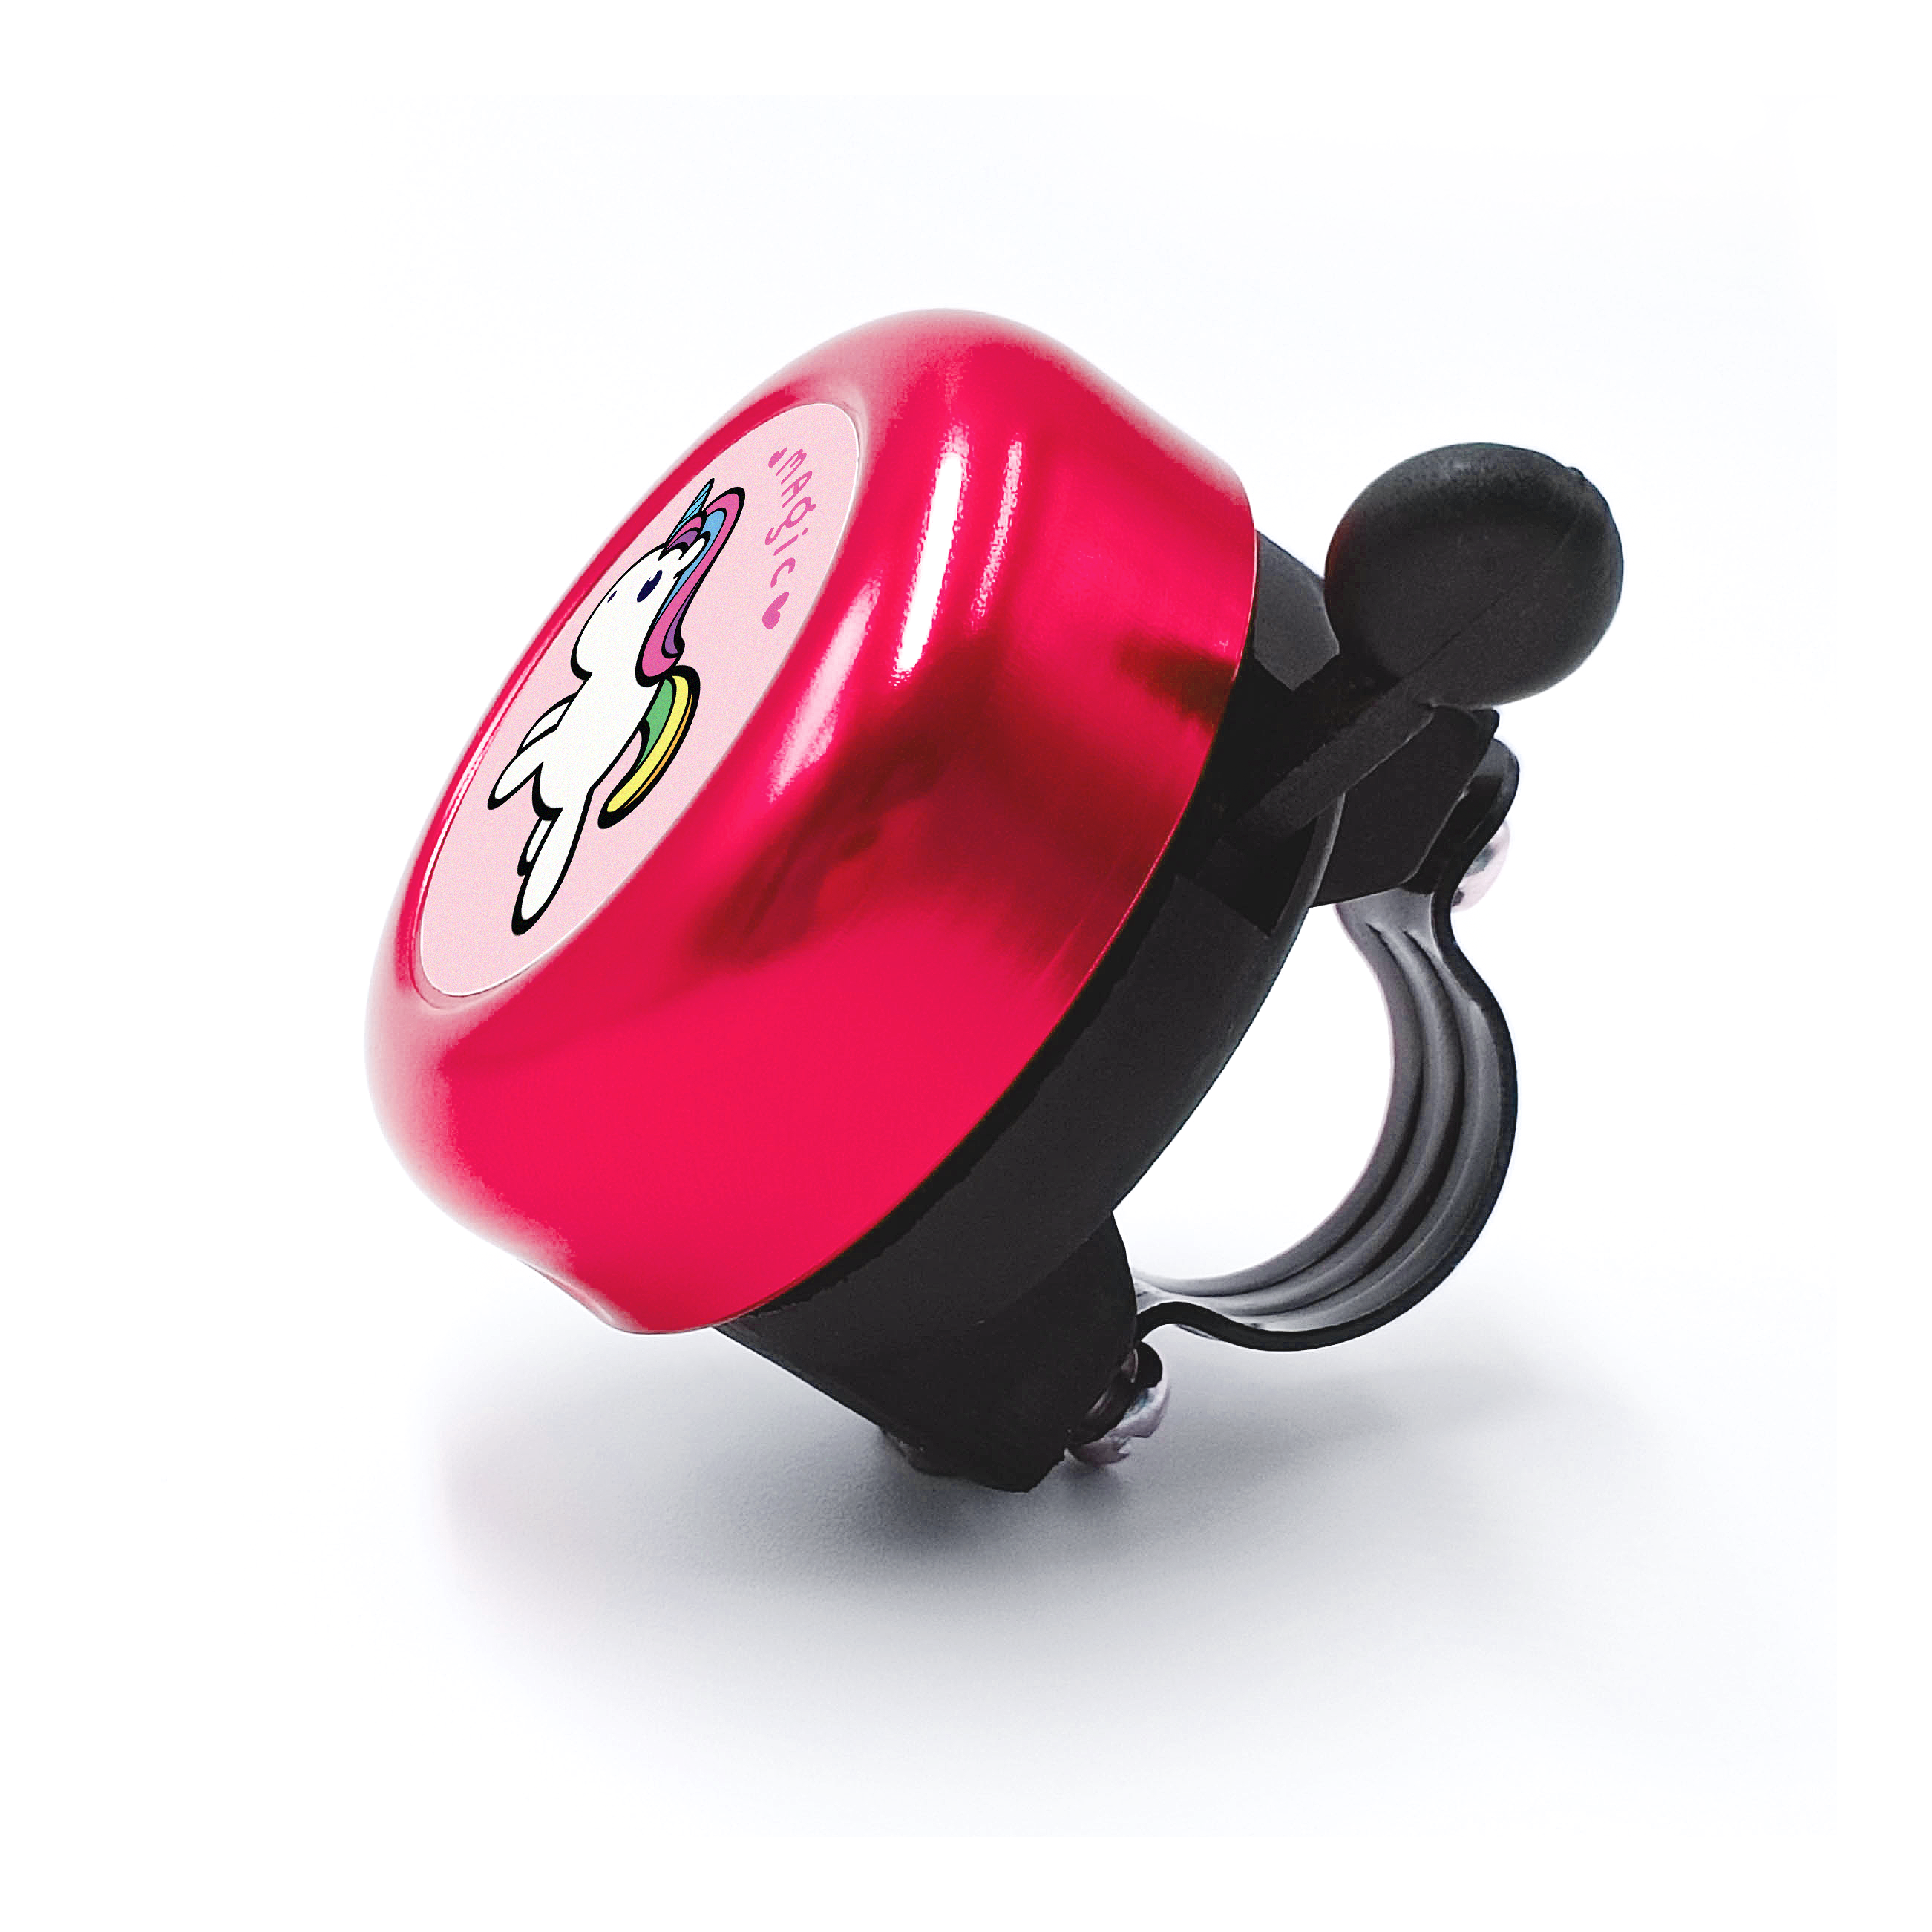 ONIPAX Cartoon Bike Bell ( customized available )